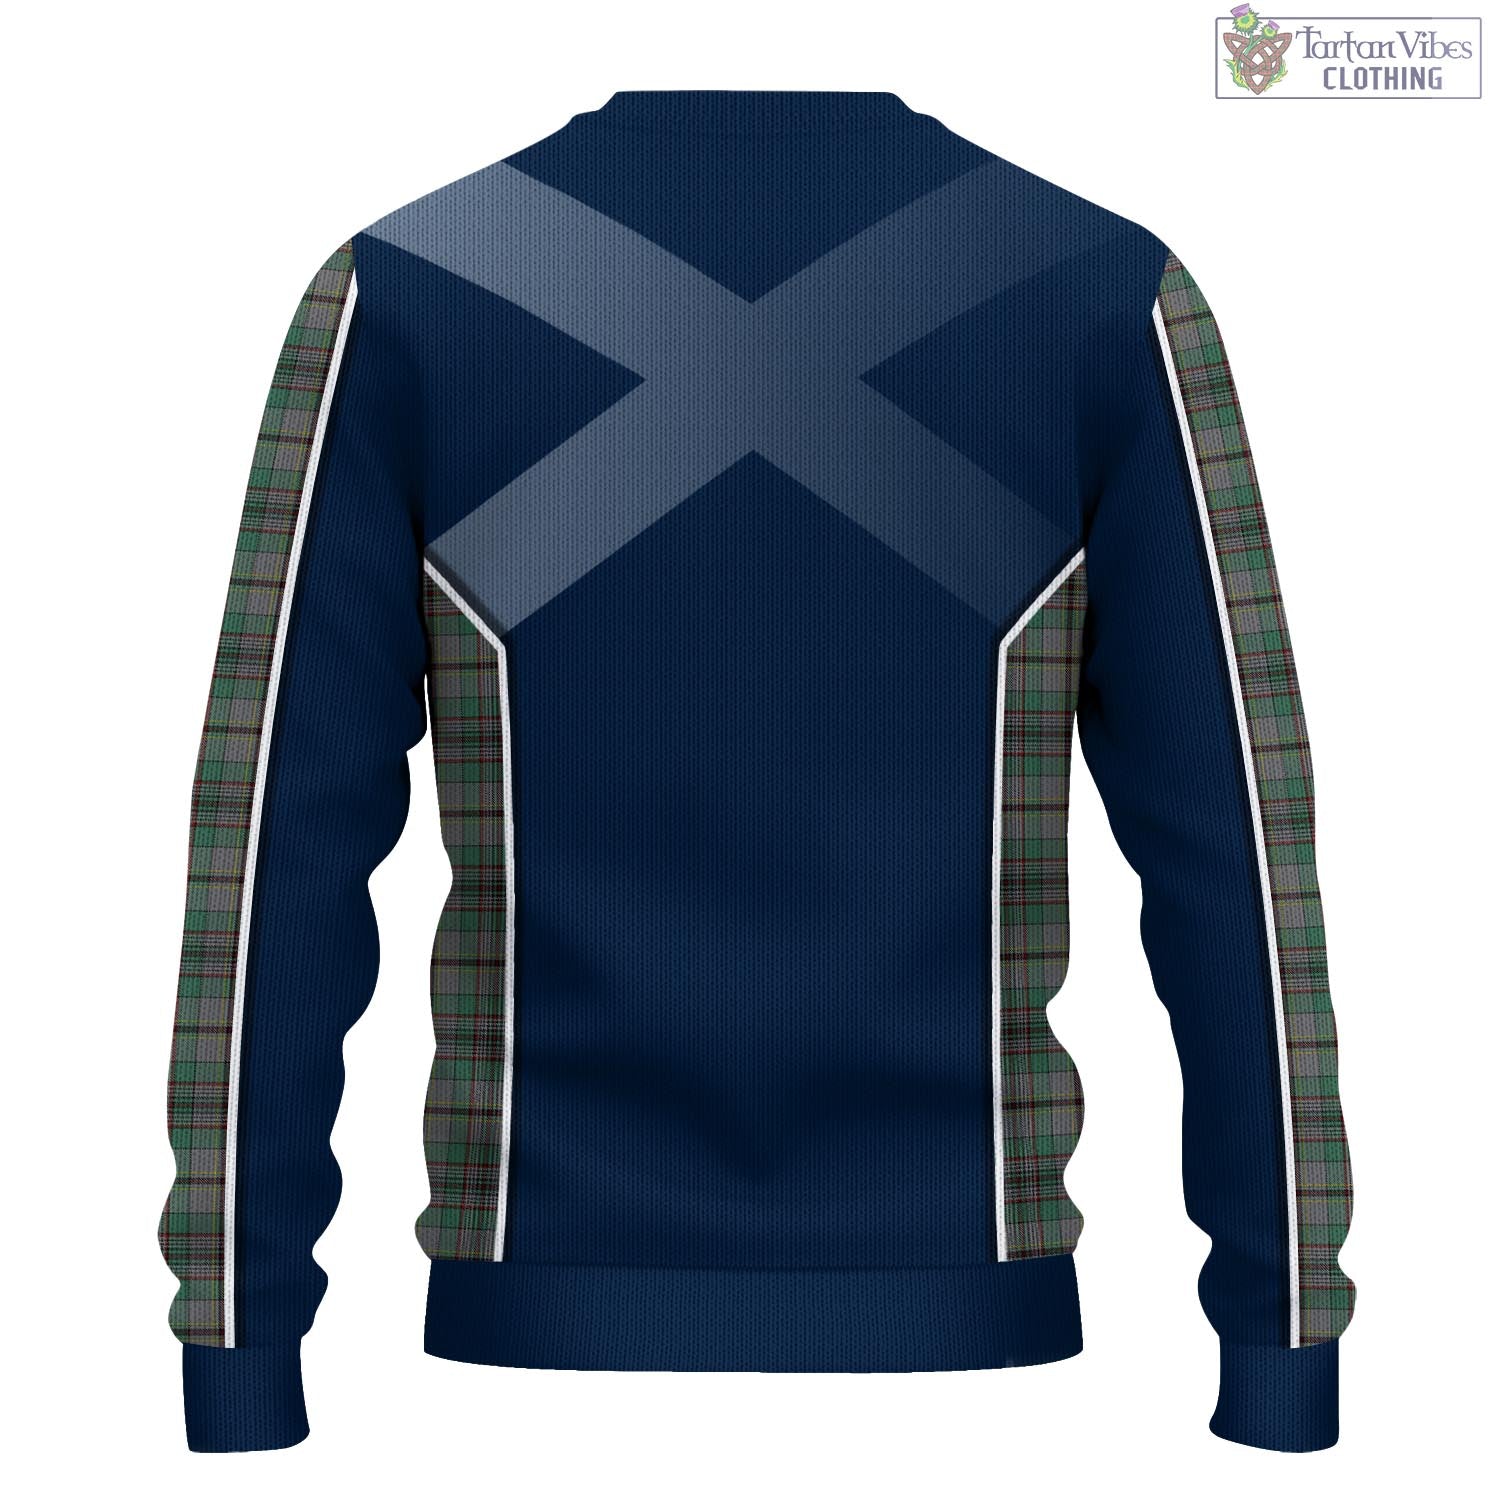 Tartan Vibes Clothing Craig Tartan Knitted Sweatshirt with Family Crest and Scottish Thistle Vibes Sport Style